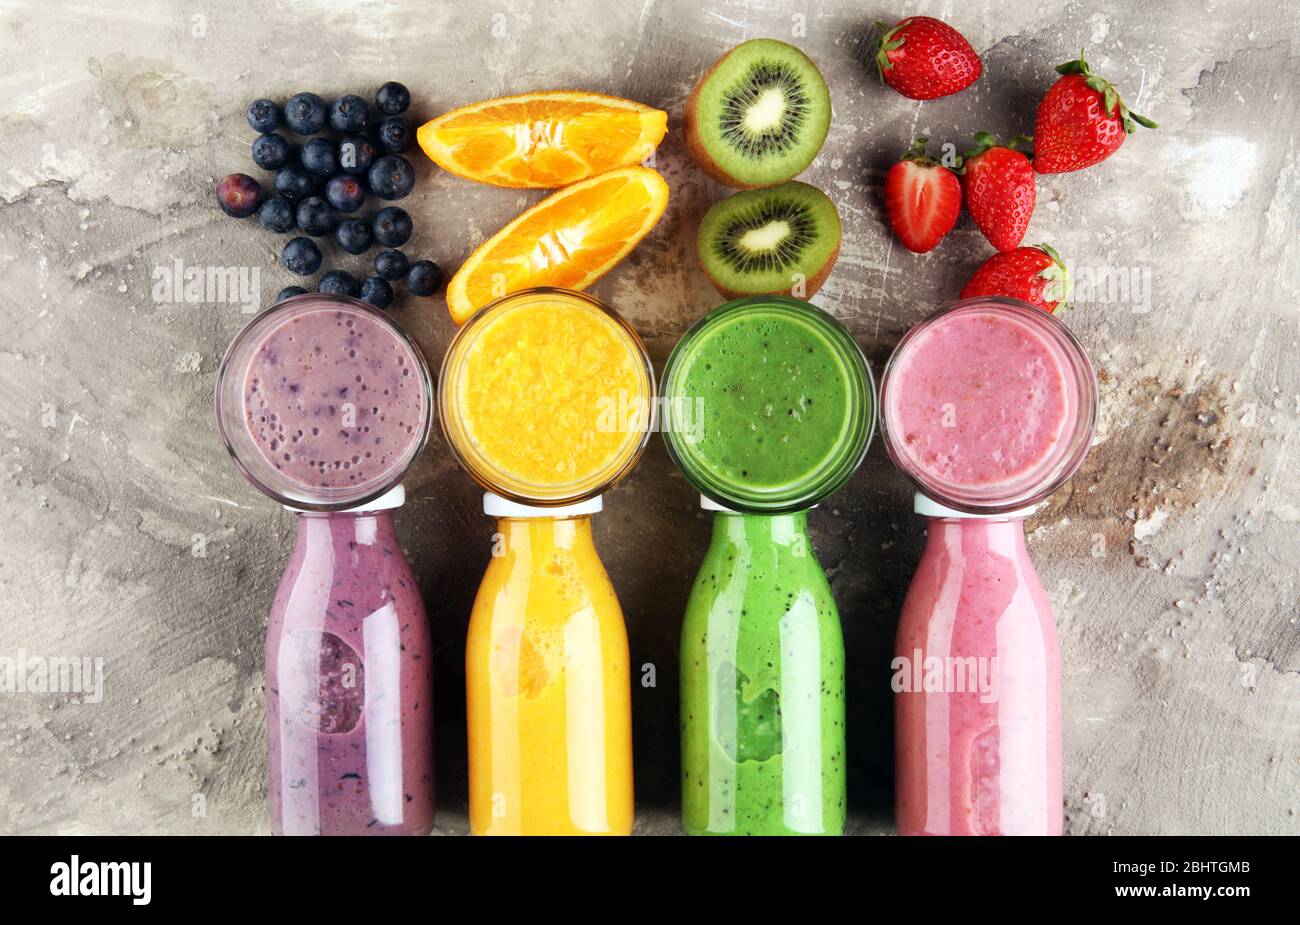 Smoothie variation. Healthy lifestyle concept. several bottles with ...